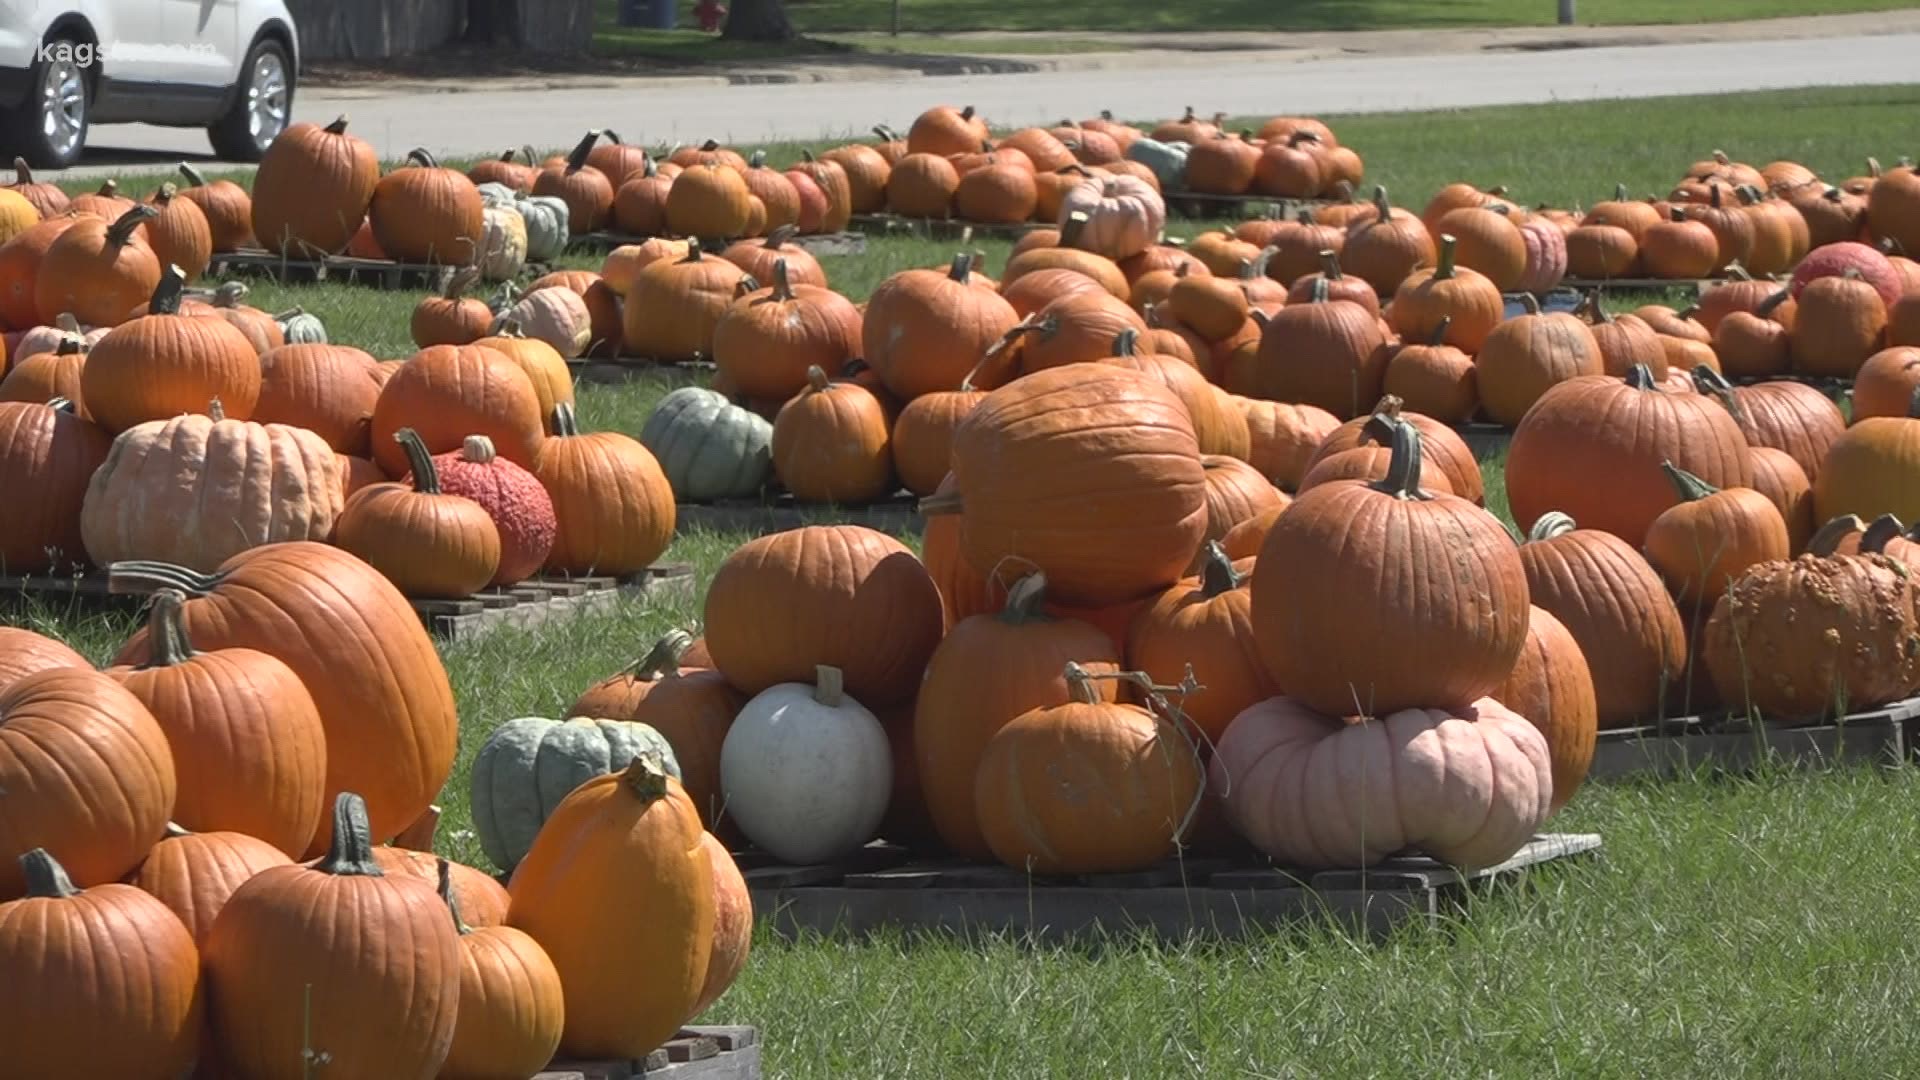 Aggie Habitat for Humanity kicked off its annual pumpkin patch Tuesday. The pumpkin patch is located by the Covenant Presbyterian Church in College Station.